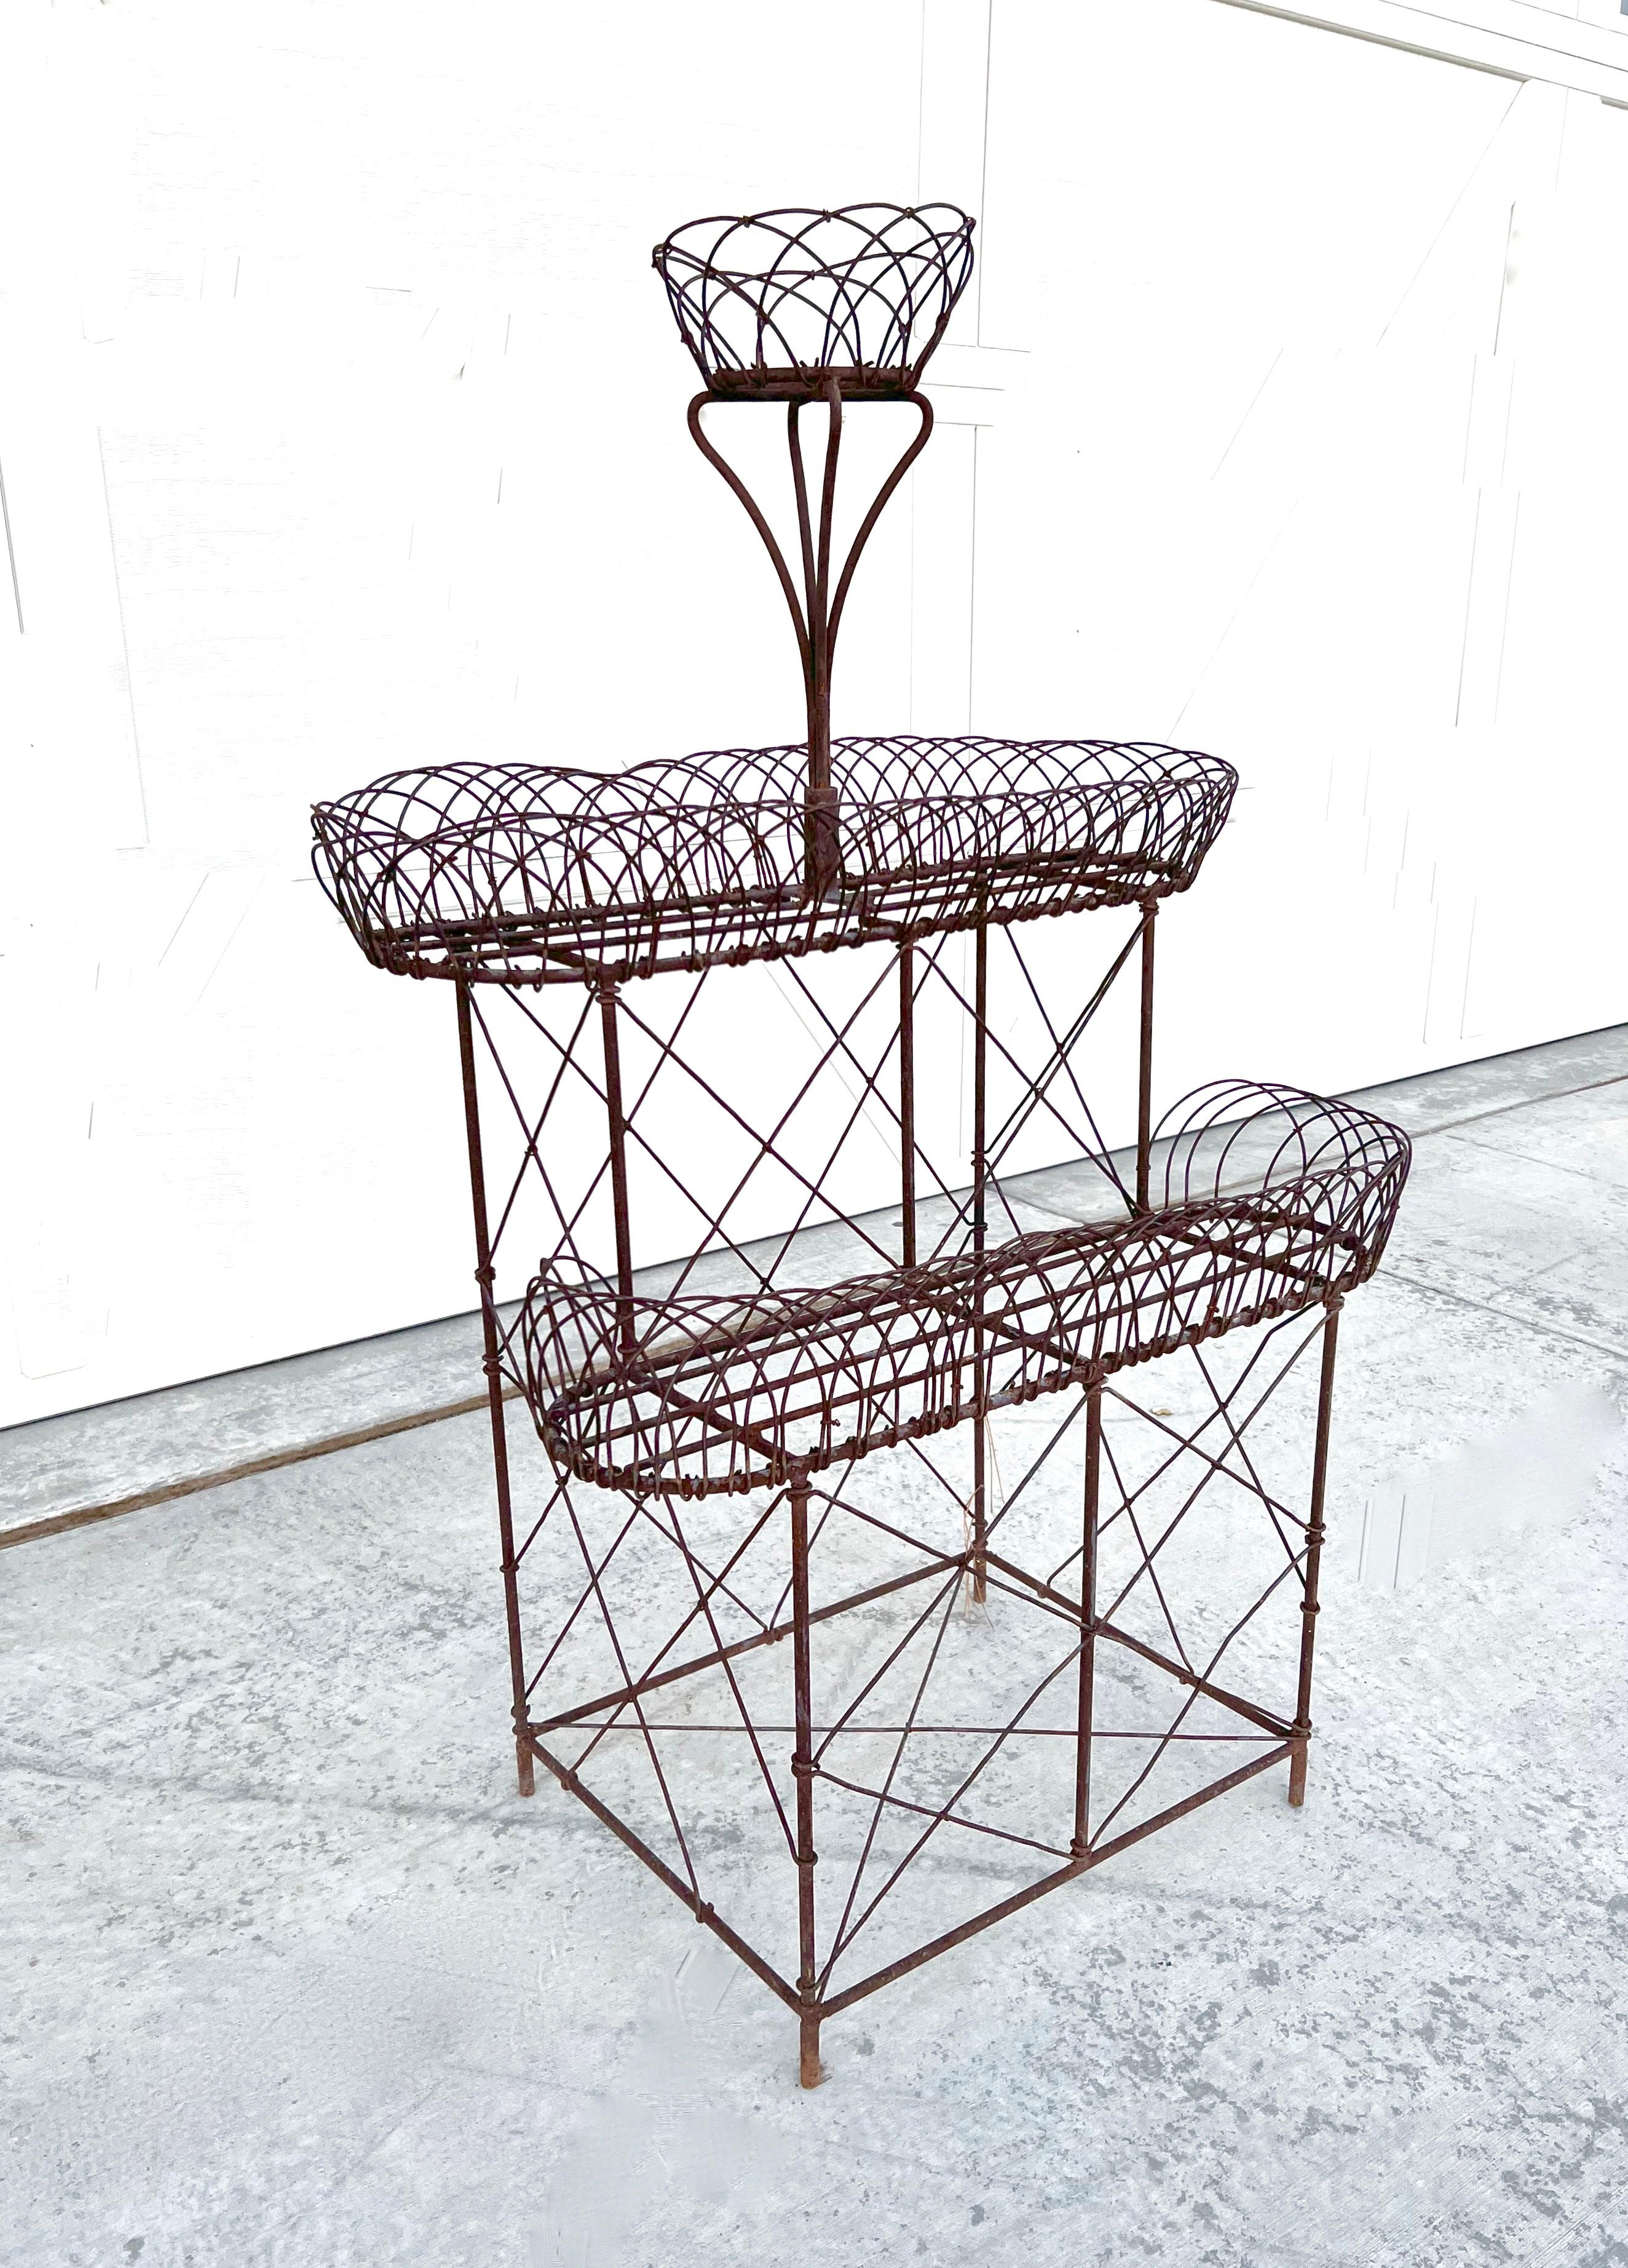 Old French Art Nouveau Style Three Tier Iron Wire Metal Planter Plant Stand

Fabulous vintage wrought iron three-tier plant stand! Beautiful Victorian style with lovely, rusted patina to the ironwork. It is in beautiful condition with